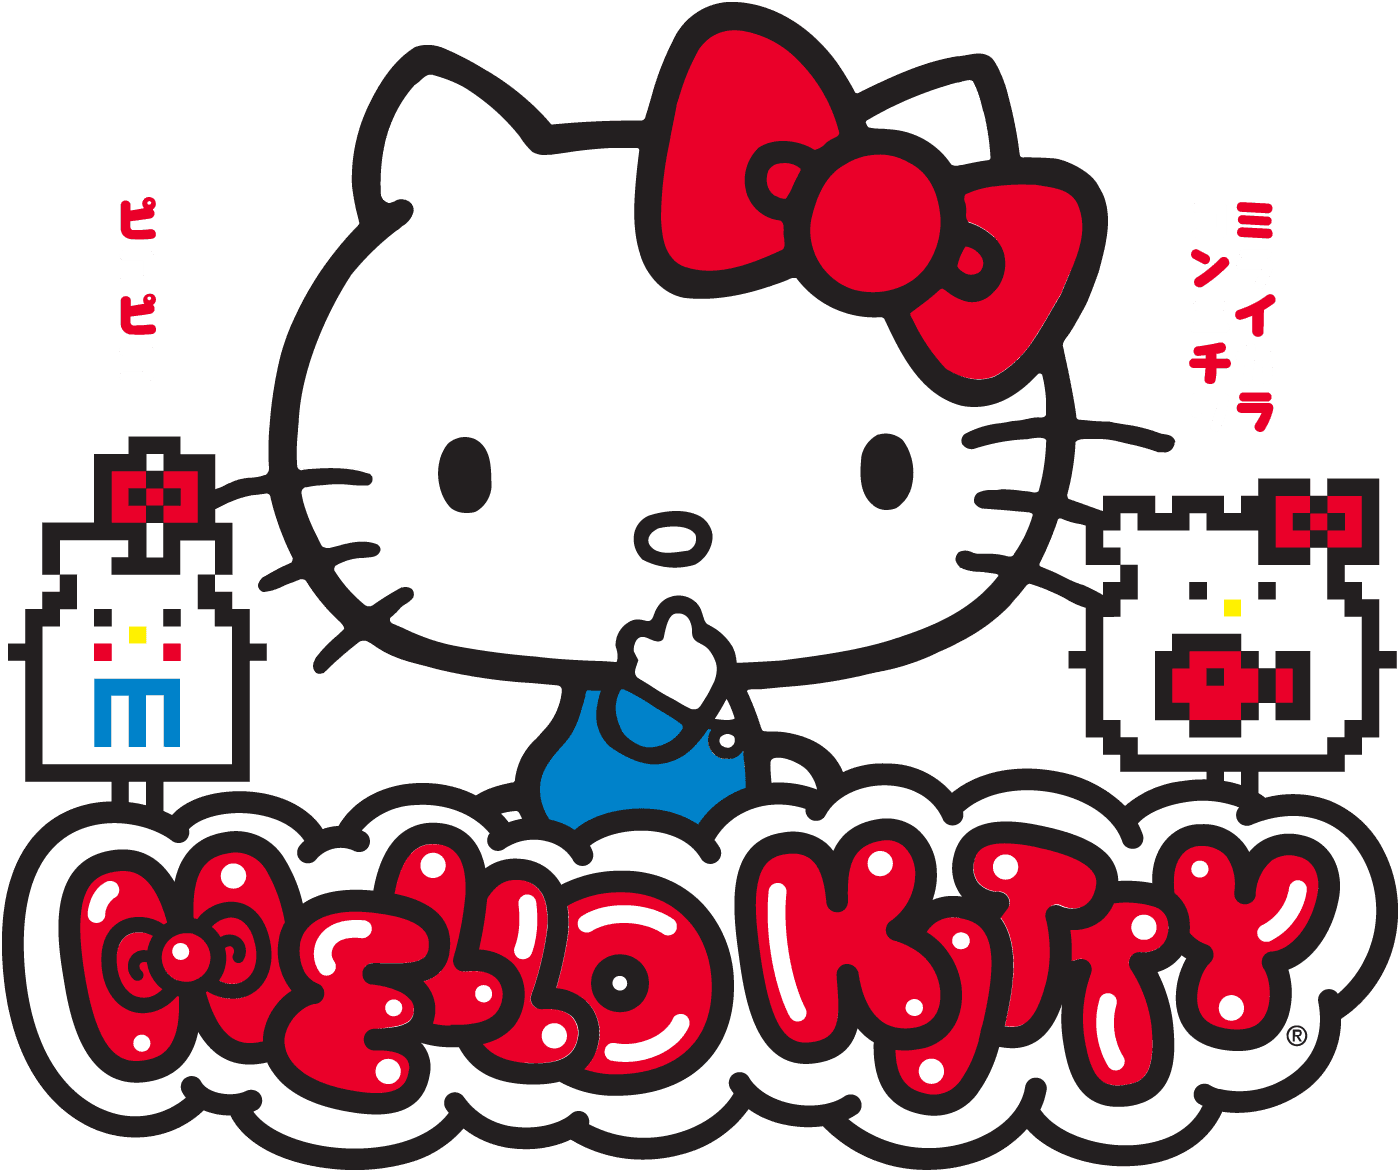 Here's What to Expect at America's First-Ever Hello Kitty Café in